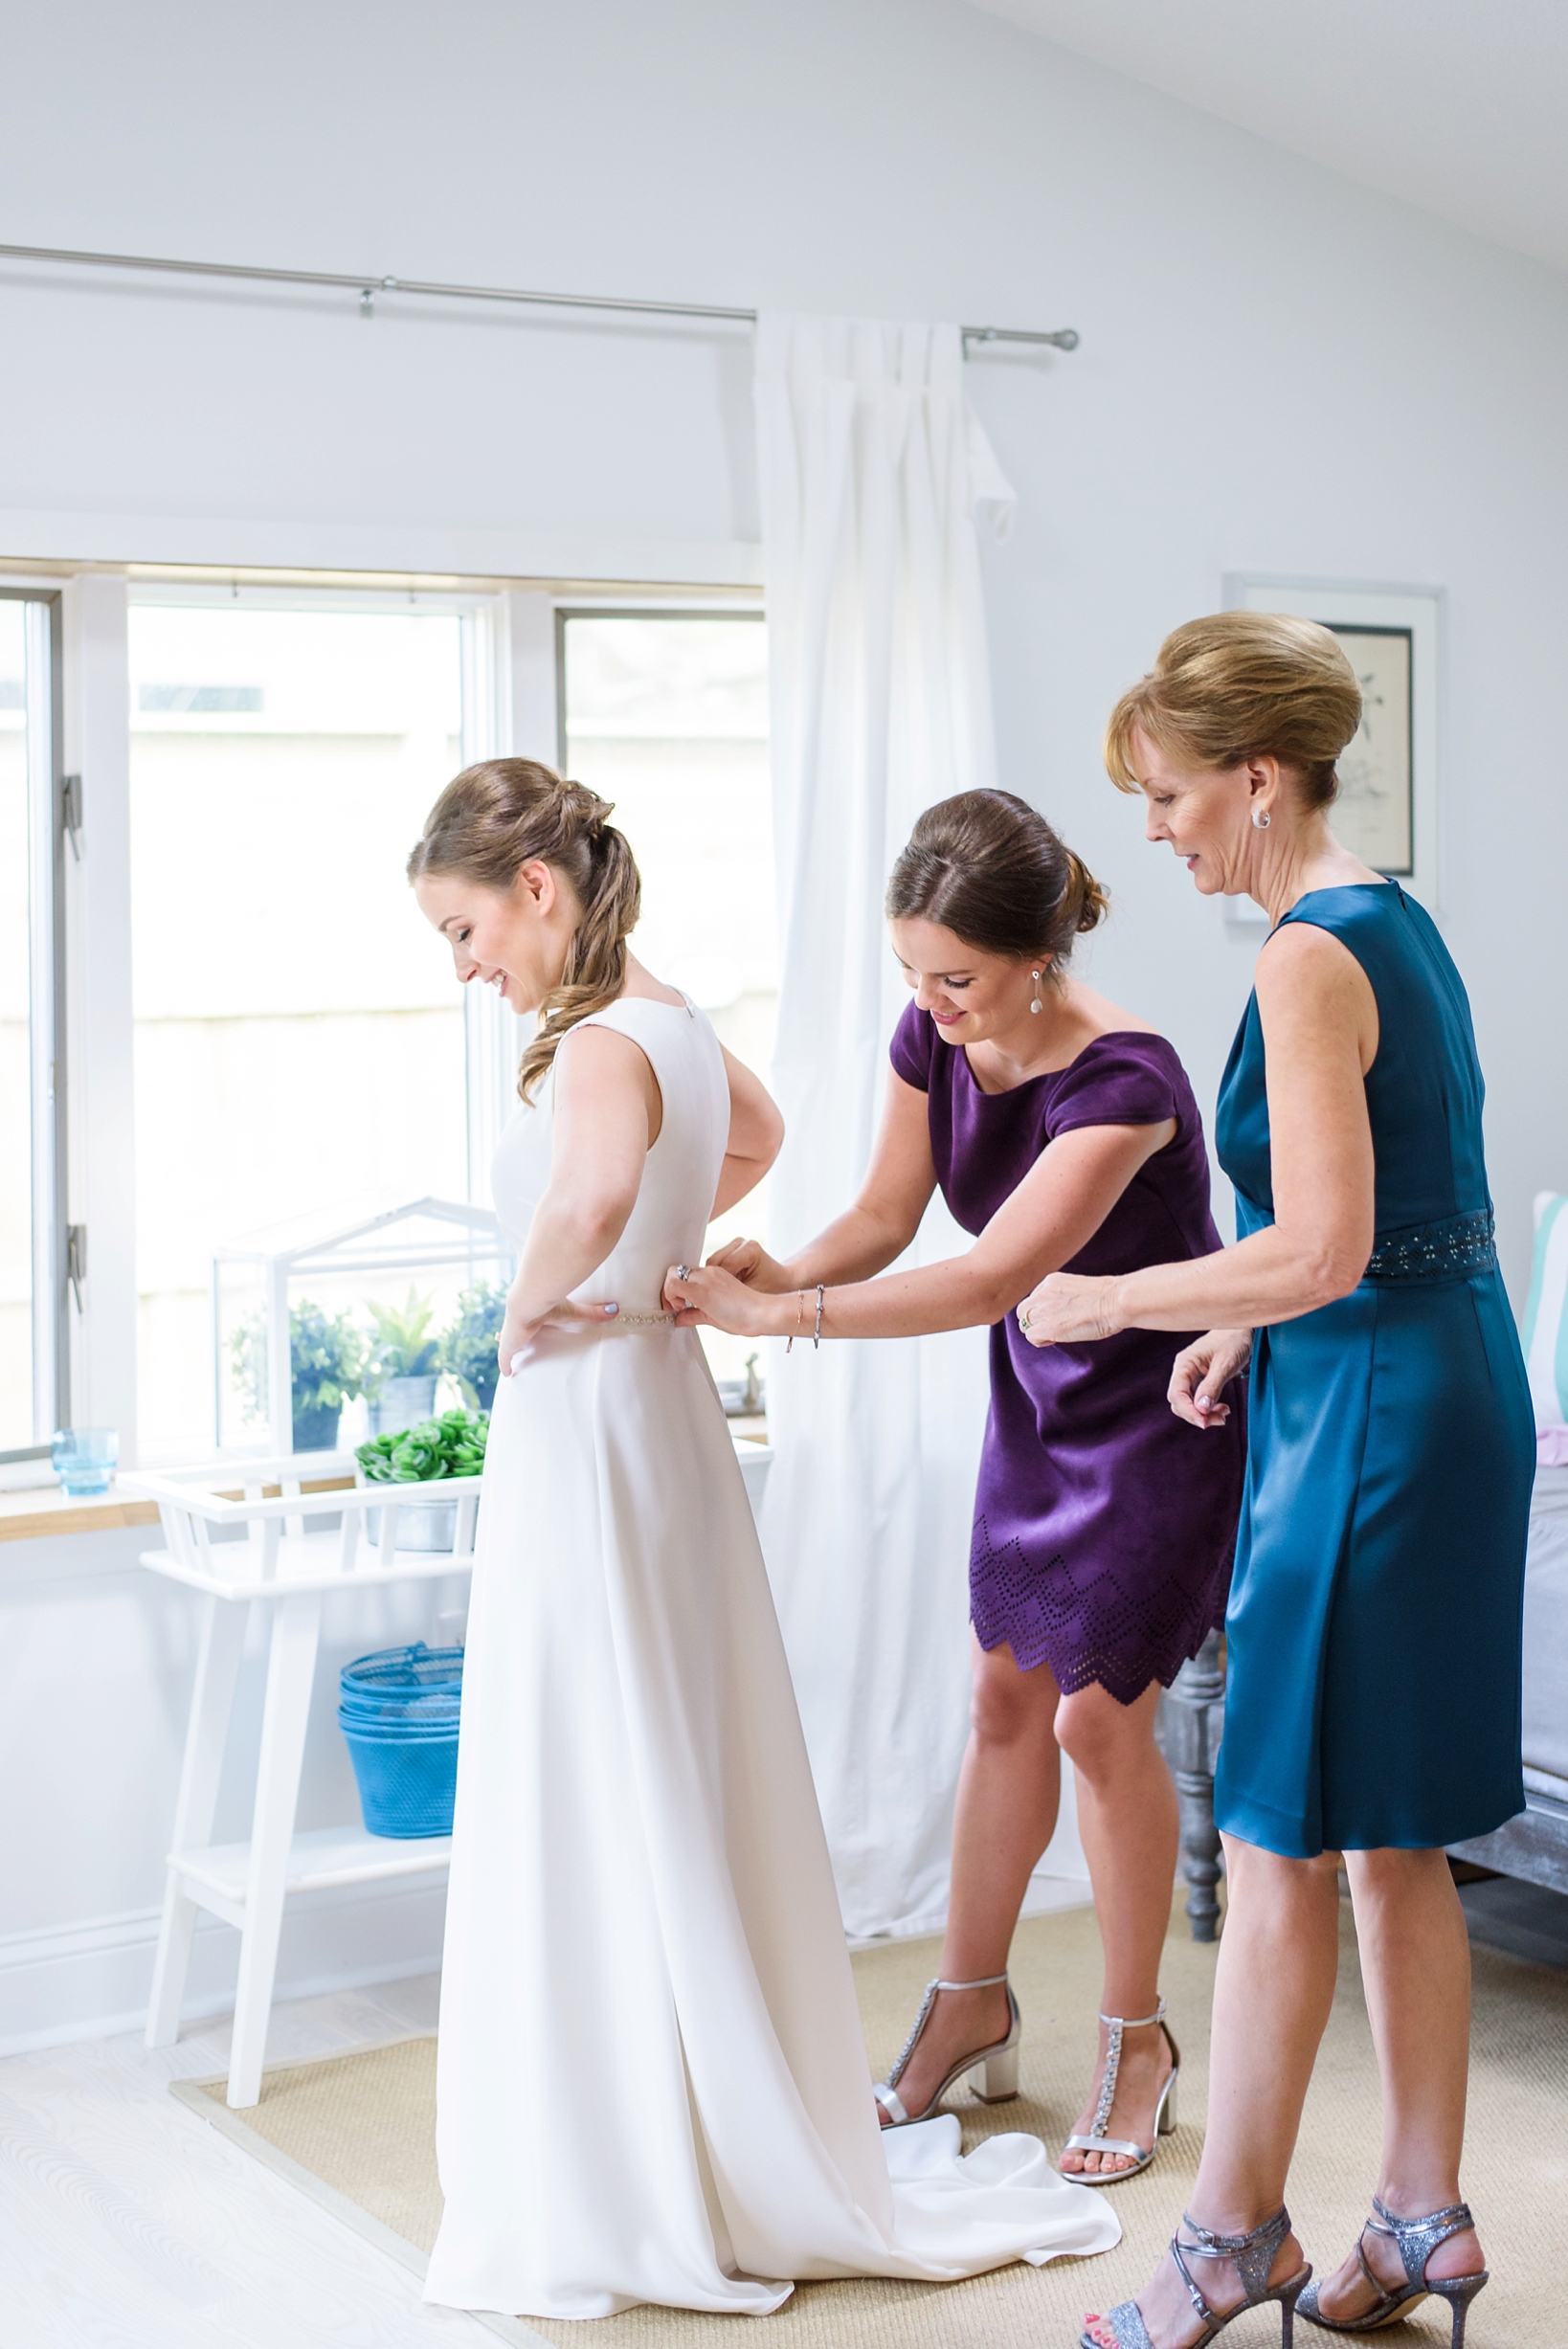 Bride getting into her dress with the help of her sister and mom